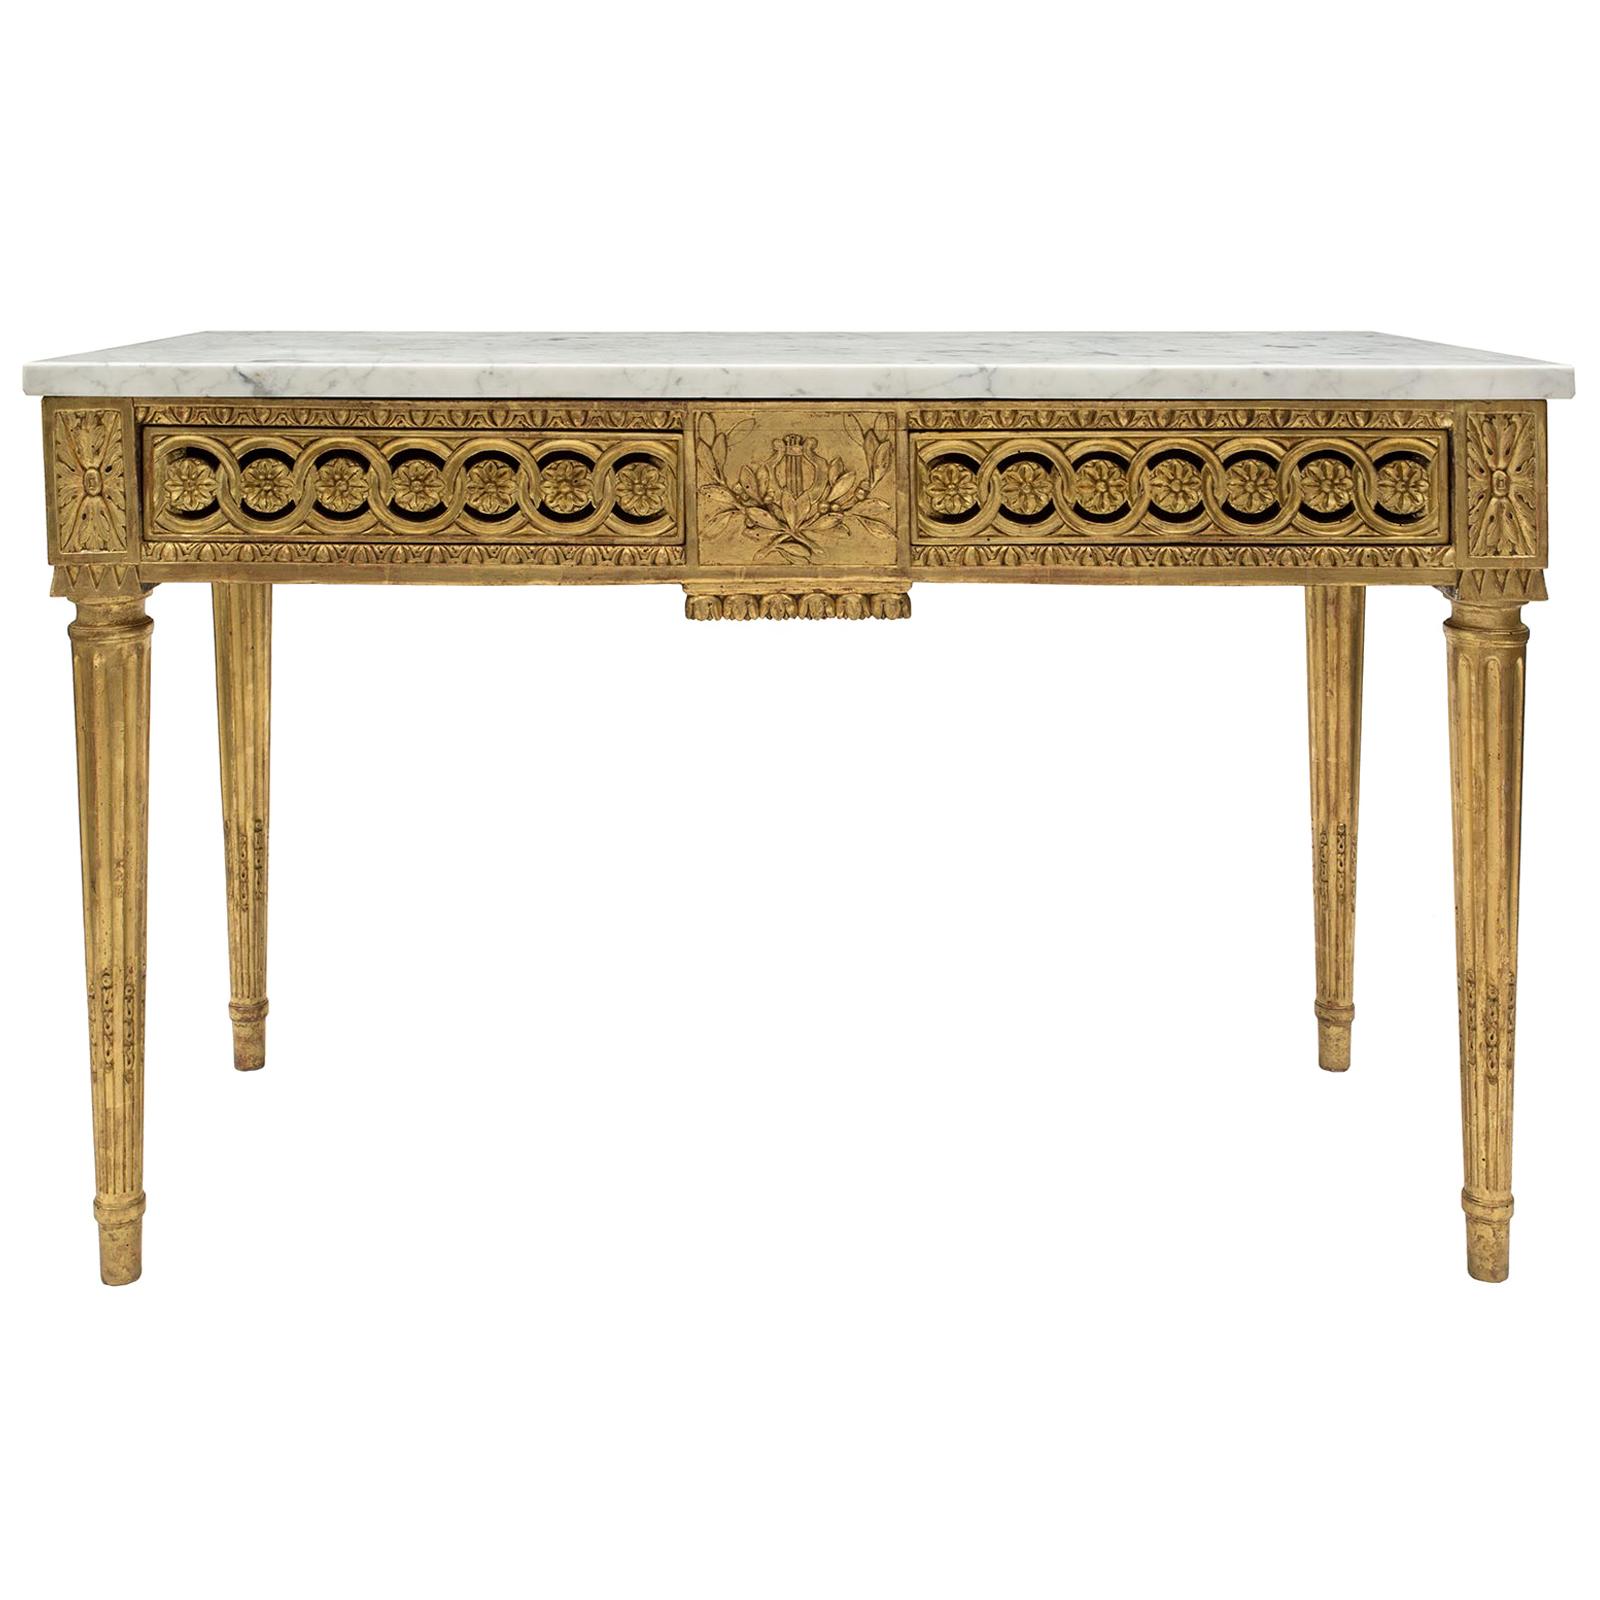 French 18th Century Louis XVI Period Giltwood and Carrara Marble Centre Table